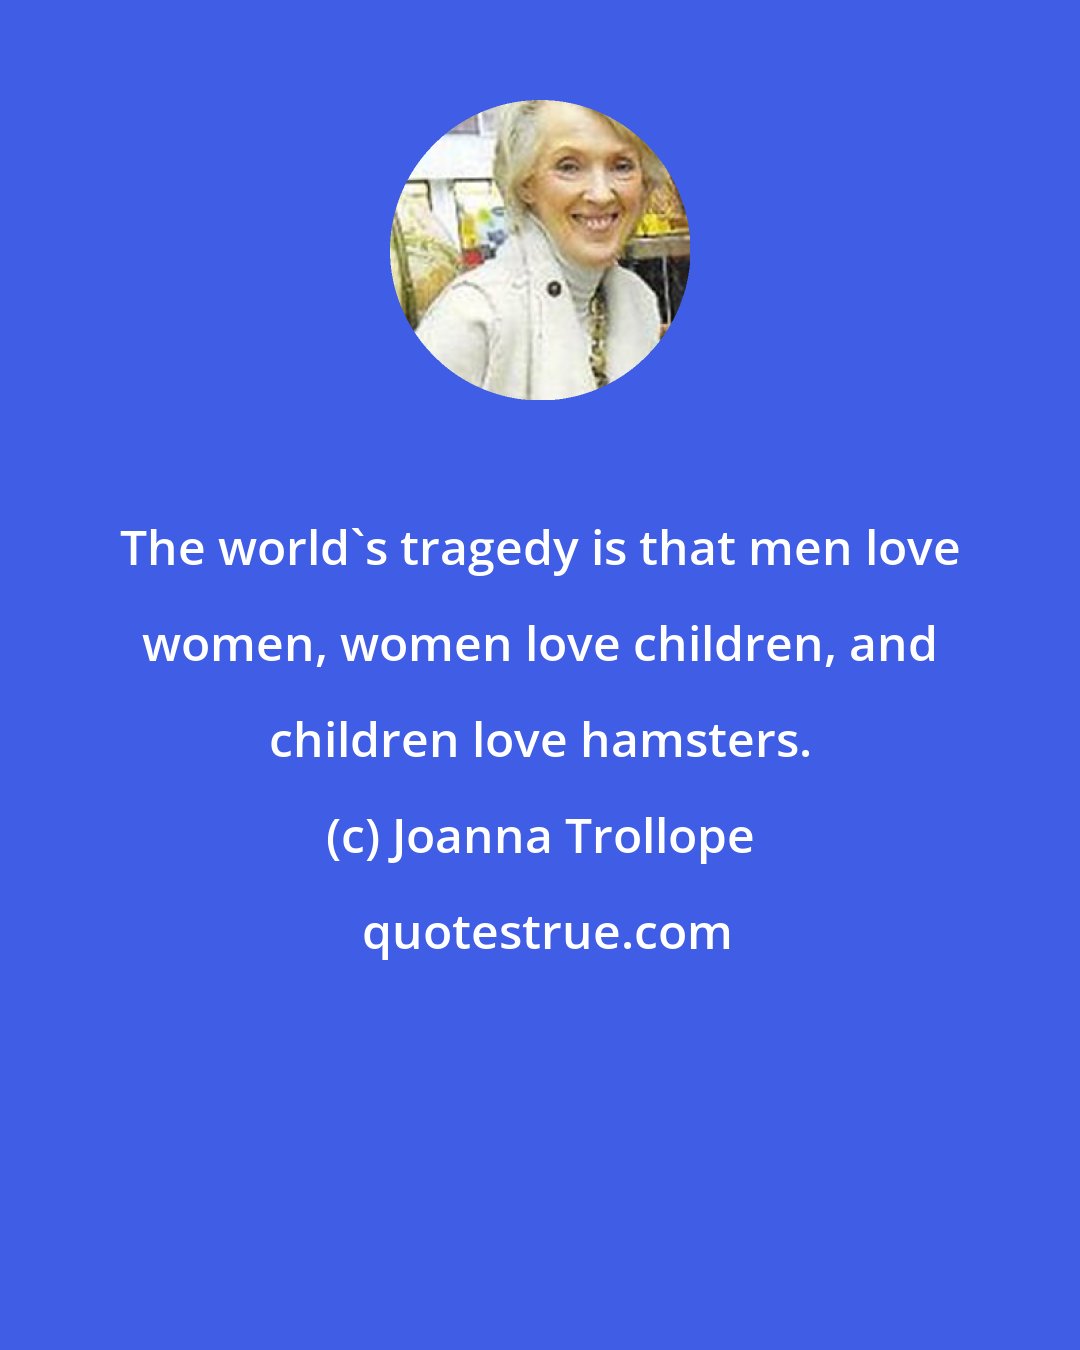 Joanna Trollope: The world's tragedy is that men love women, women love children, and children love hamsters.